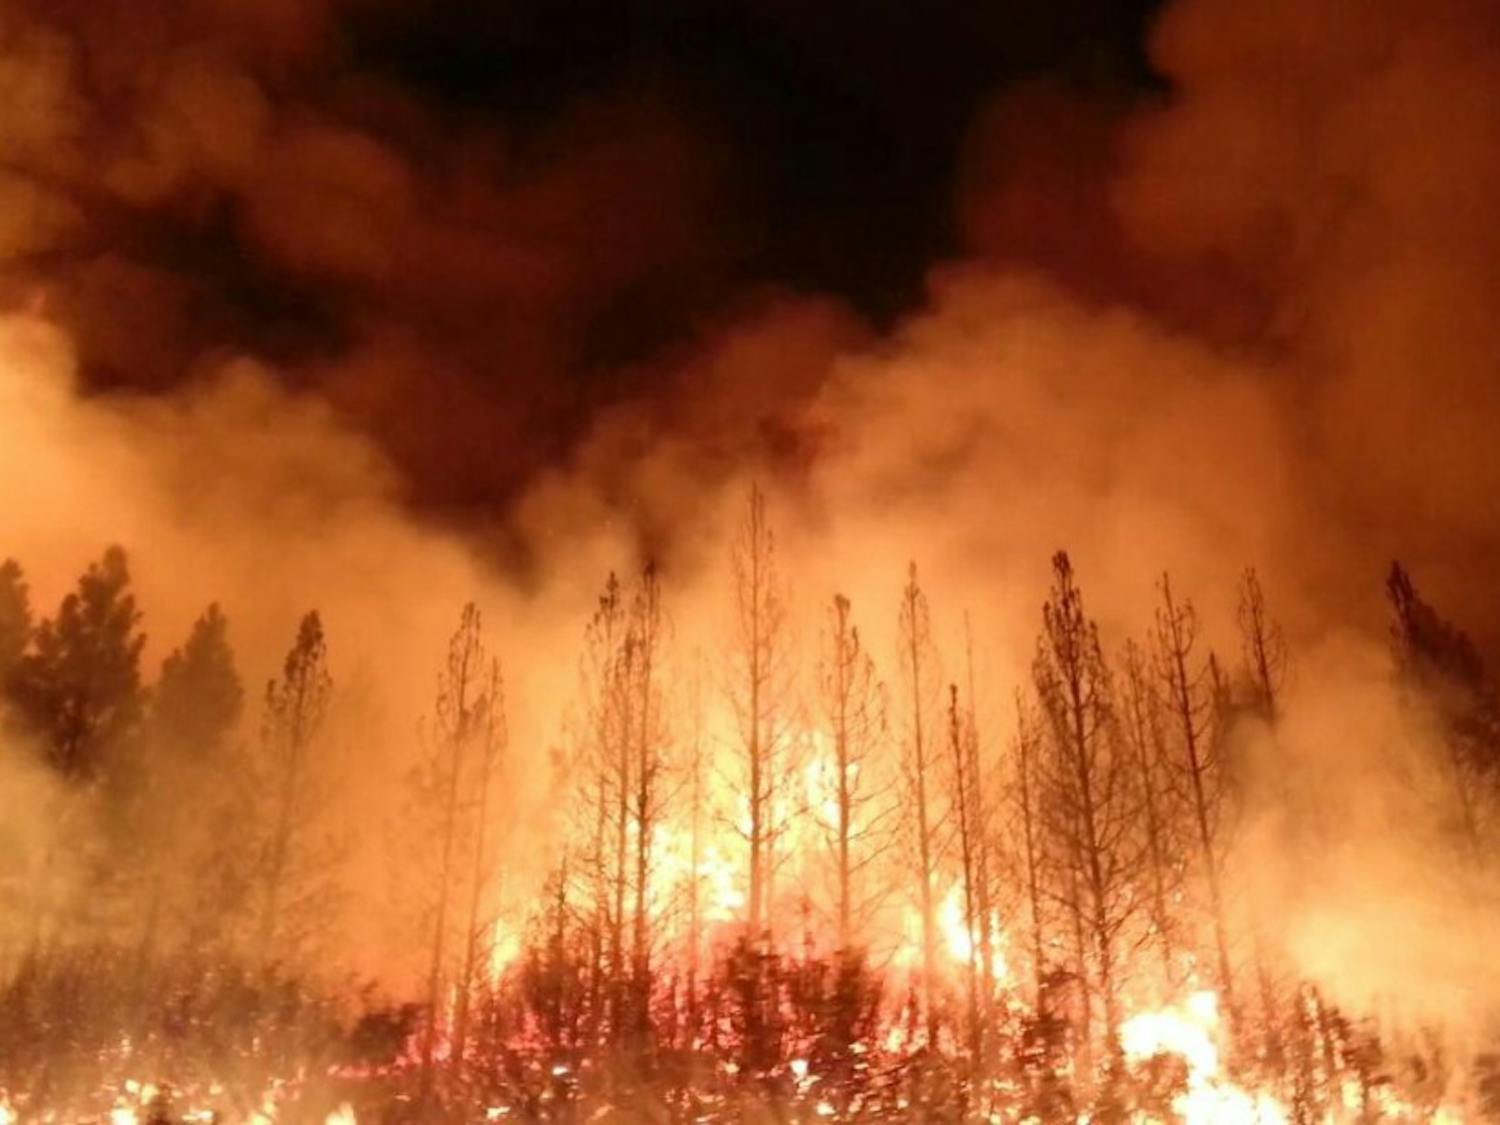 The Rim Fire in the Stanislaus National Forest near in California began on Aug. 17, 2013 and is under investigation. The fire has consumed approximately 149, 780 acres and is 15% contained. U.S. Forest Service photo.